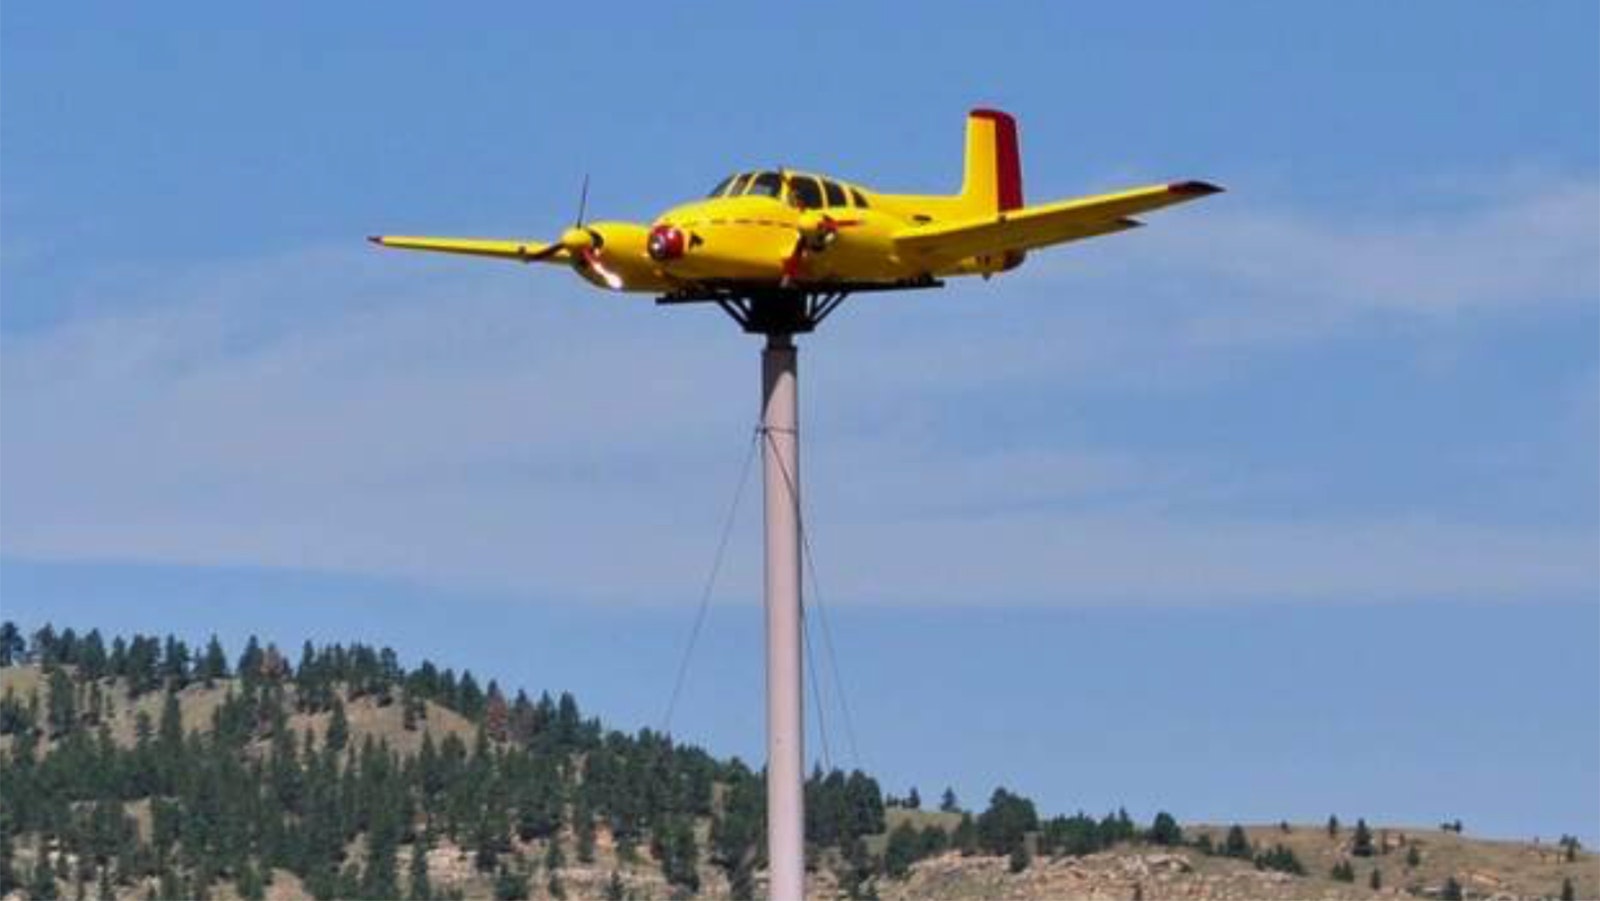 The Quaal Windsock is a 1950s Beechcraft Twin Bonanza on top of a 70-foot pole outside Sundance, Wyoming, along Interstate 90.